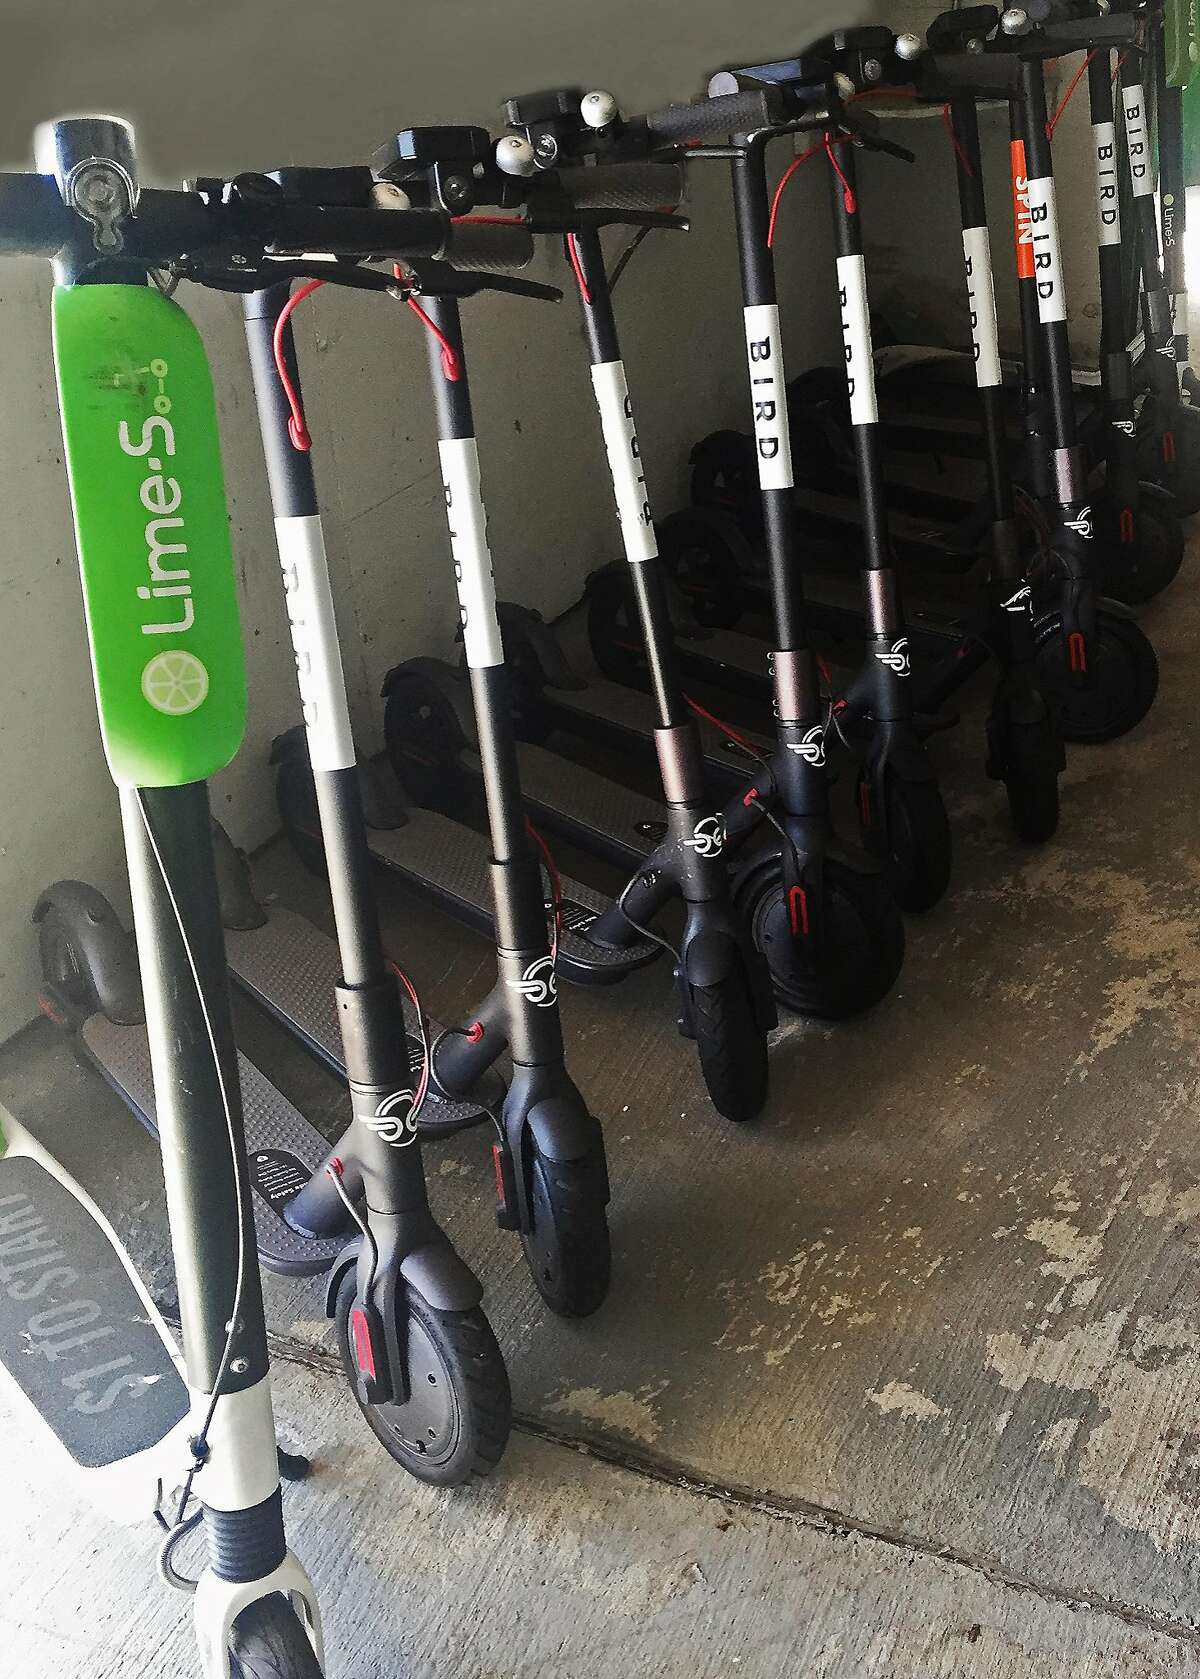 Confiscated scooters are seen at a San Francisco Department of Public Works storage facility on Friday, April 13, 2018 in San Francisco, Calif.